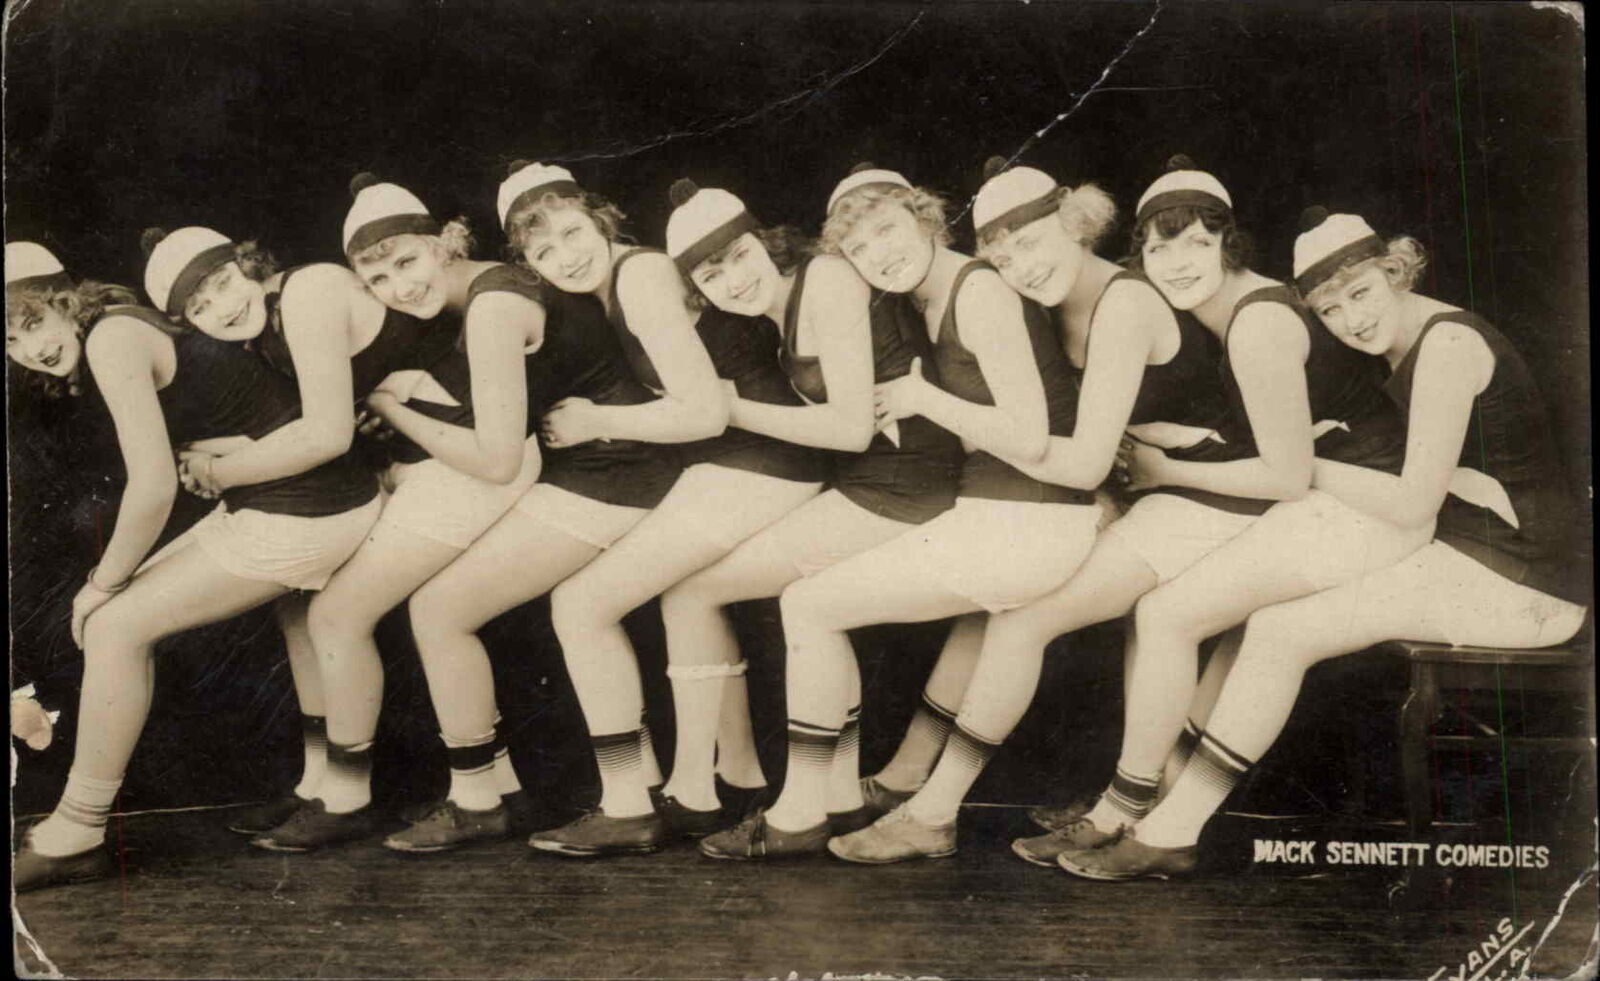 Sexy Pinup Bathing Beauty Girls Sit On Laps Mack Sennett Comedies C1920 Rppc Other Unsorted 